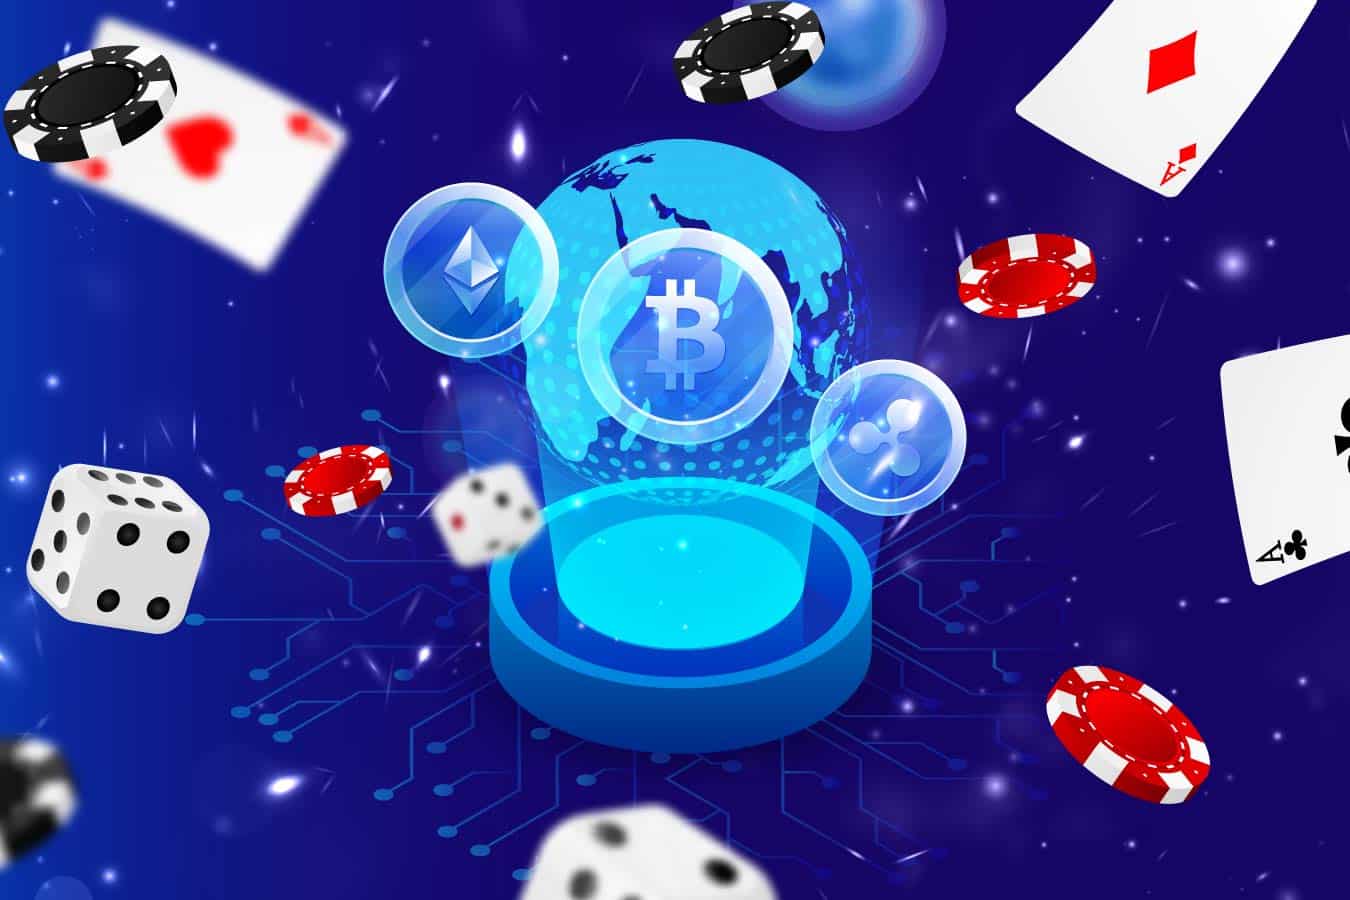 Here's Why Cryptos Like Ripple Are on the Rise in the Gambling Industry